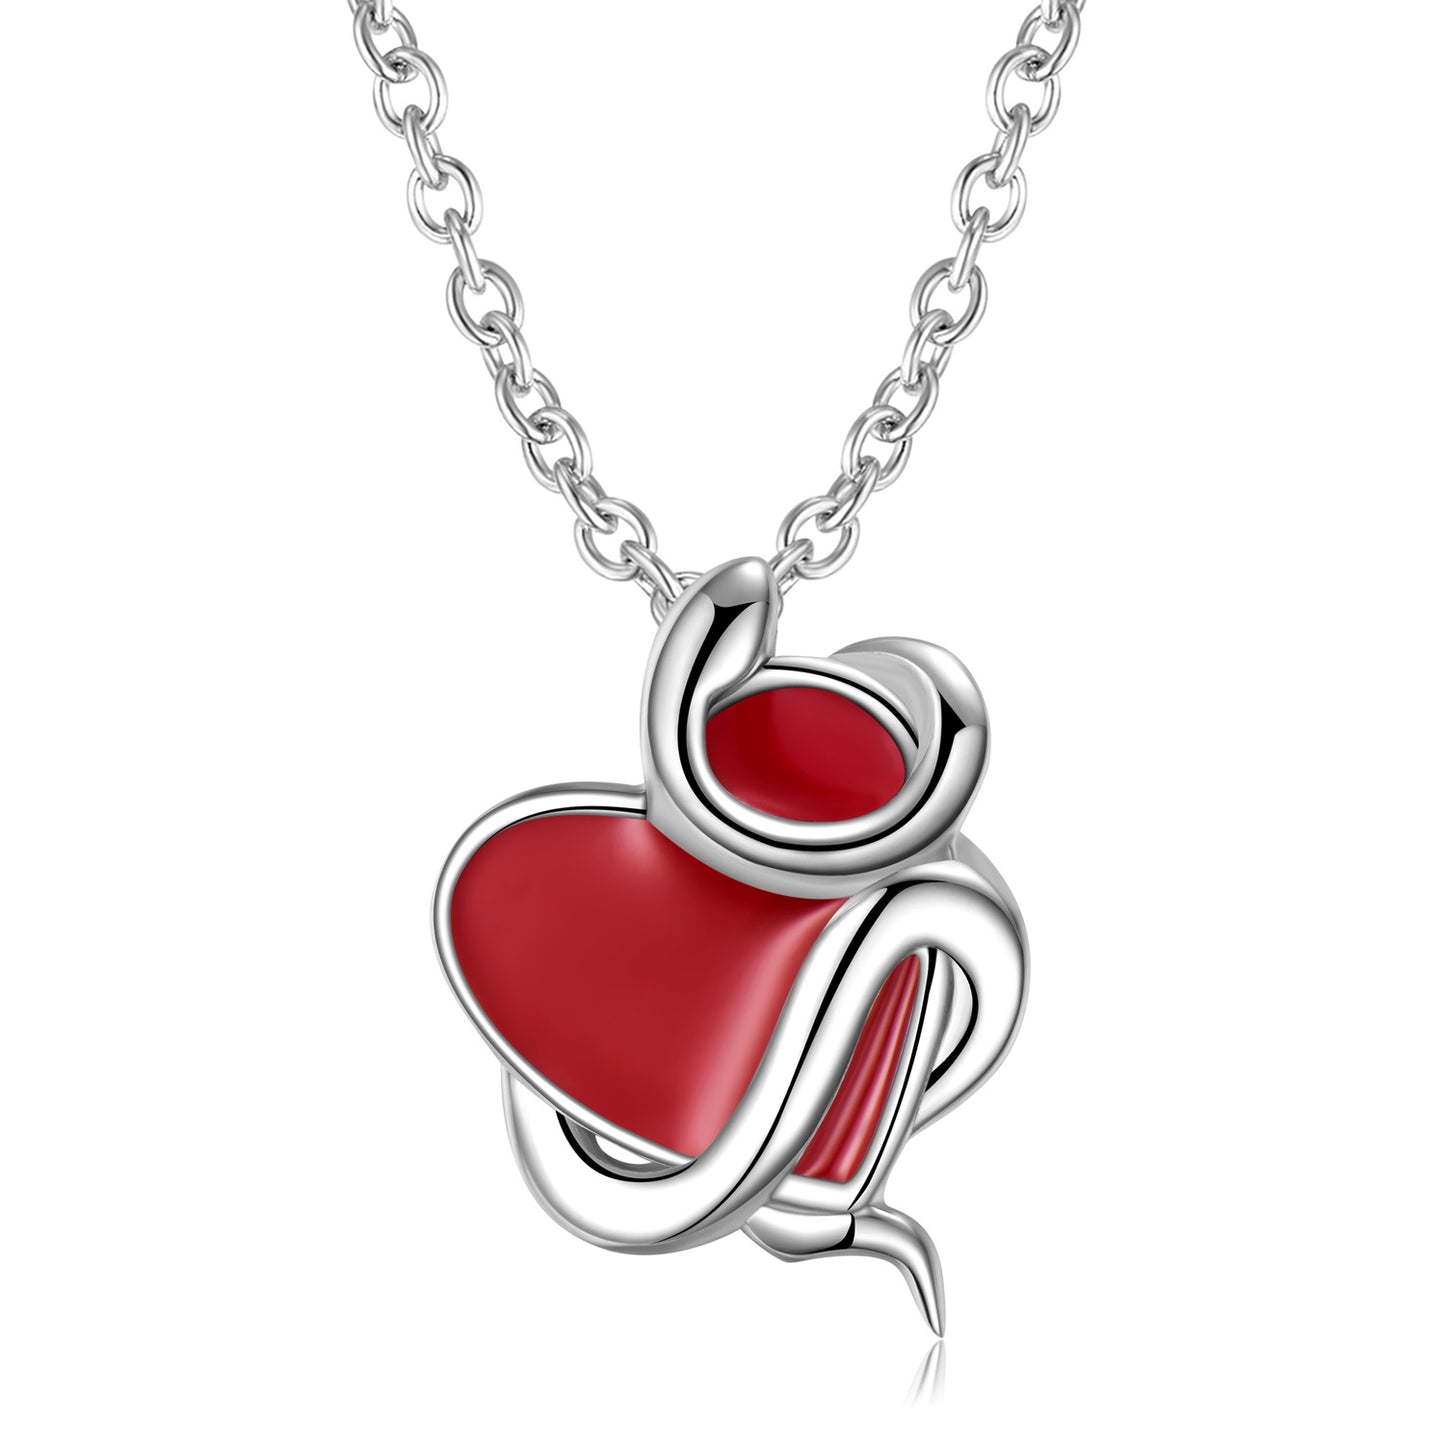 FairyLocus "Everlasting Love" Christmas Heart Cut Sterling Silver Necklace Jewelry Gift FLCYNL06 FairyLocus